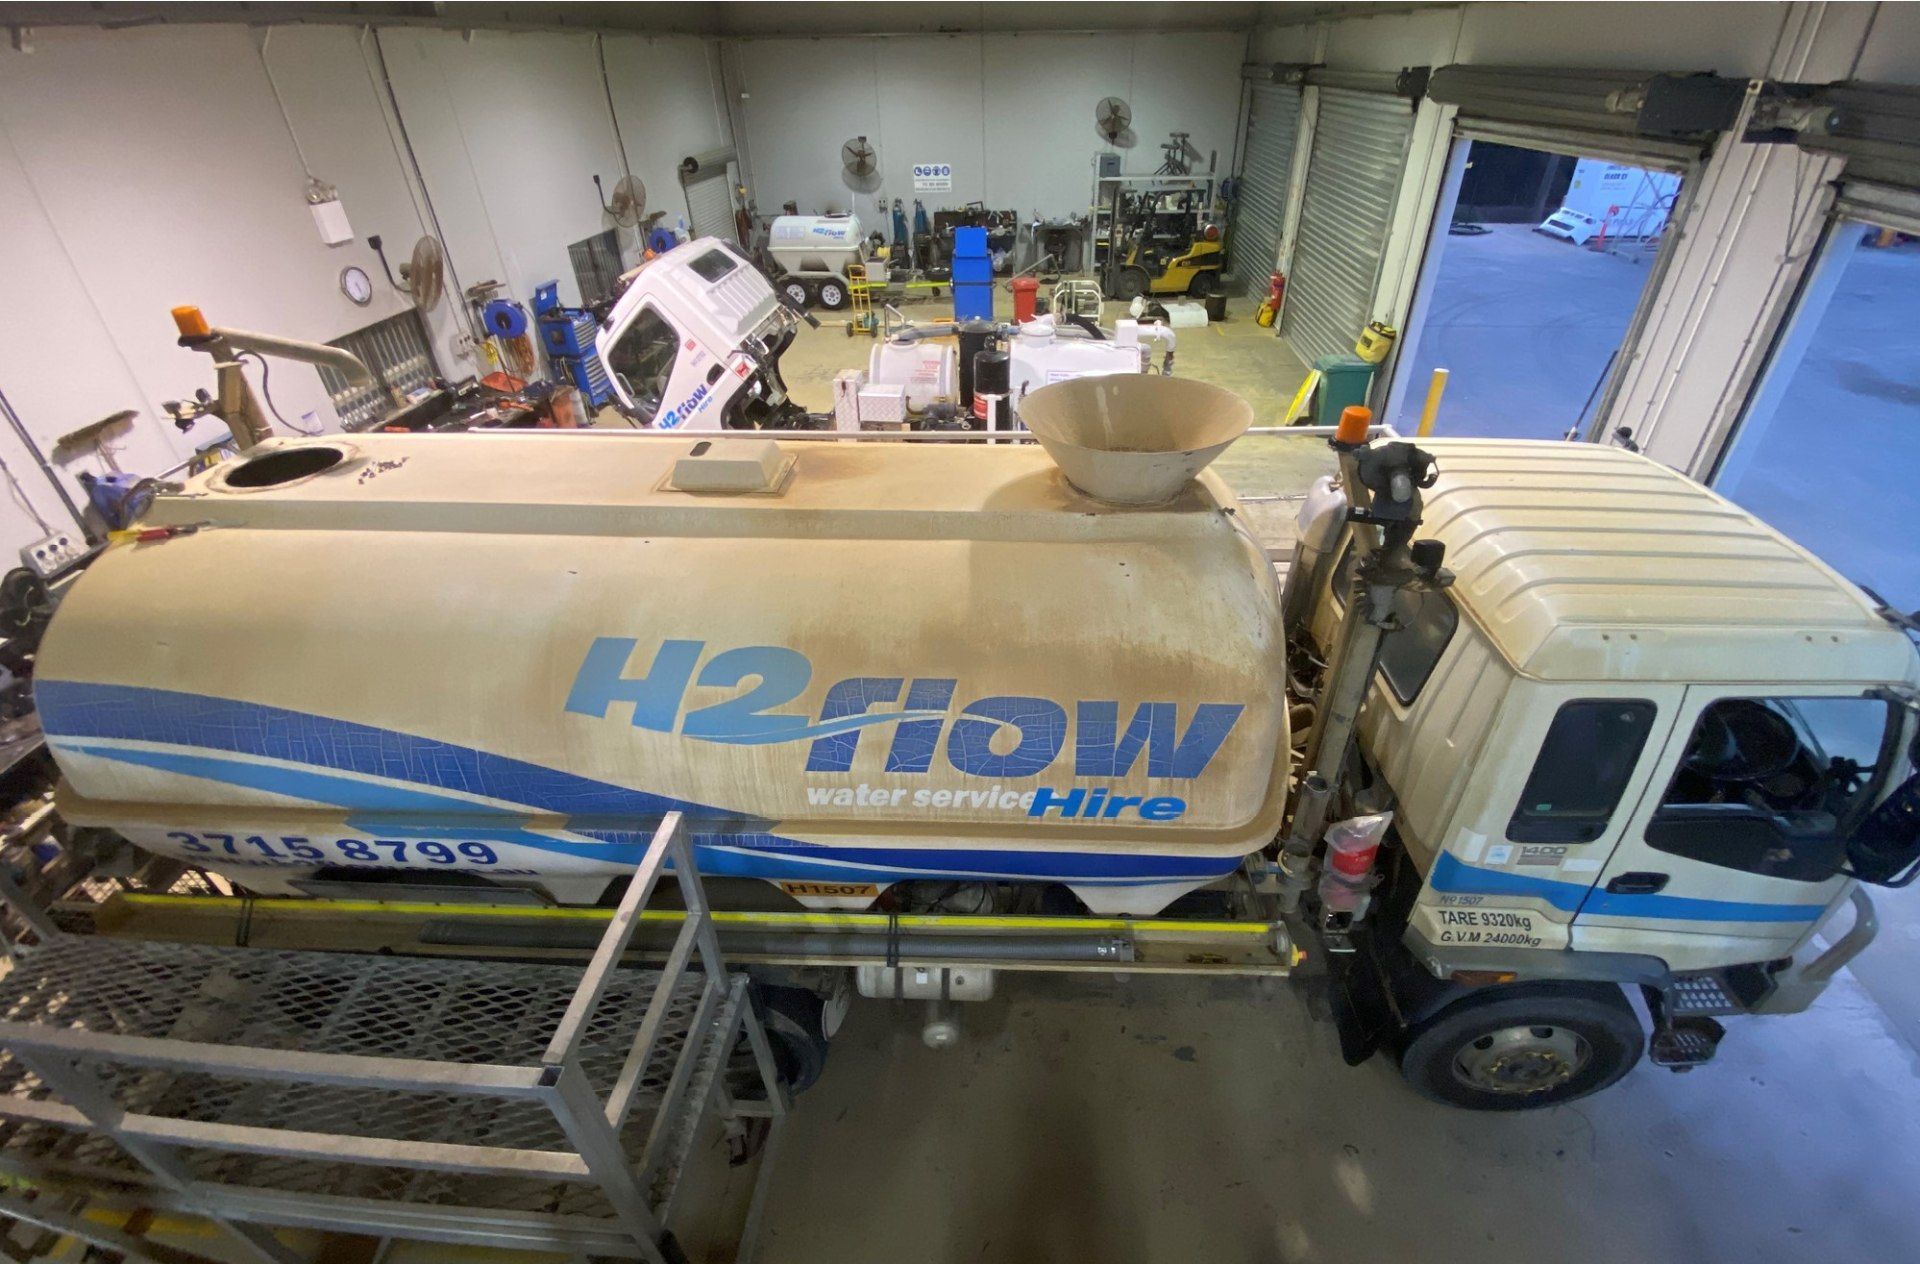 H2flow Hire water truck transformation